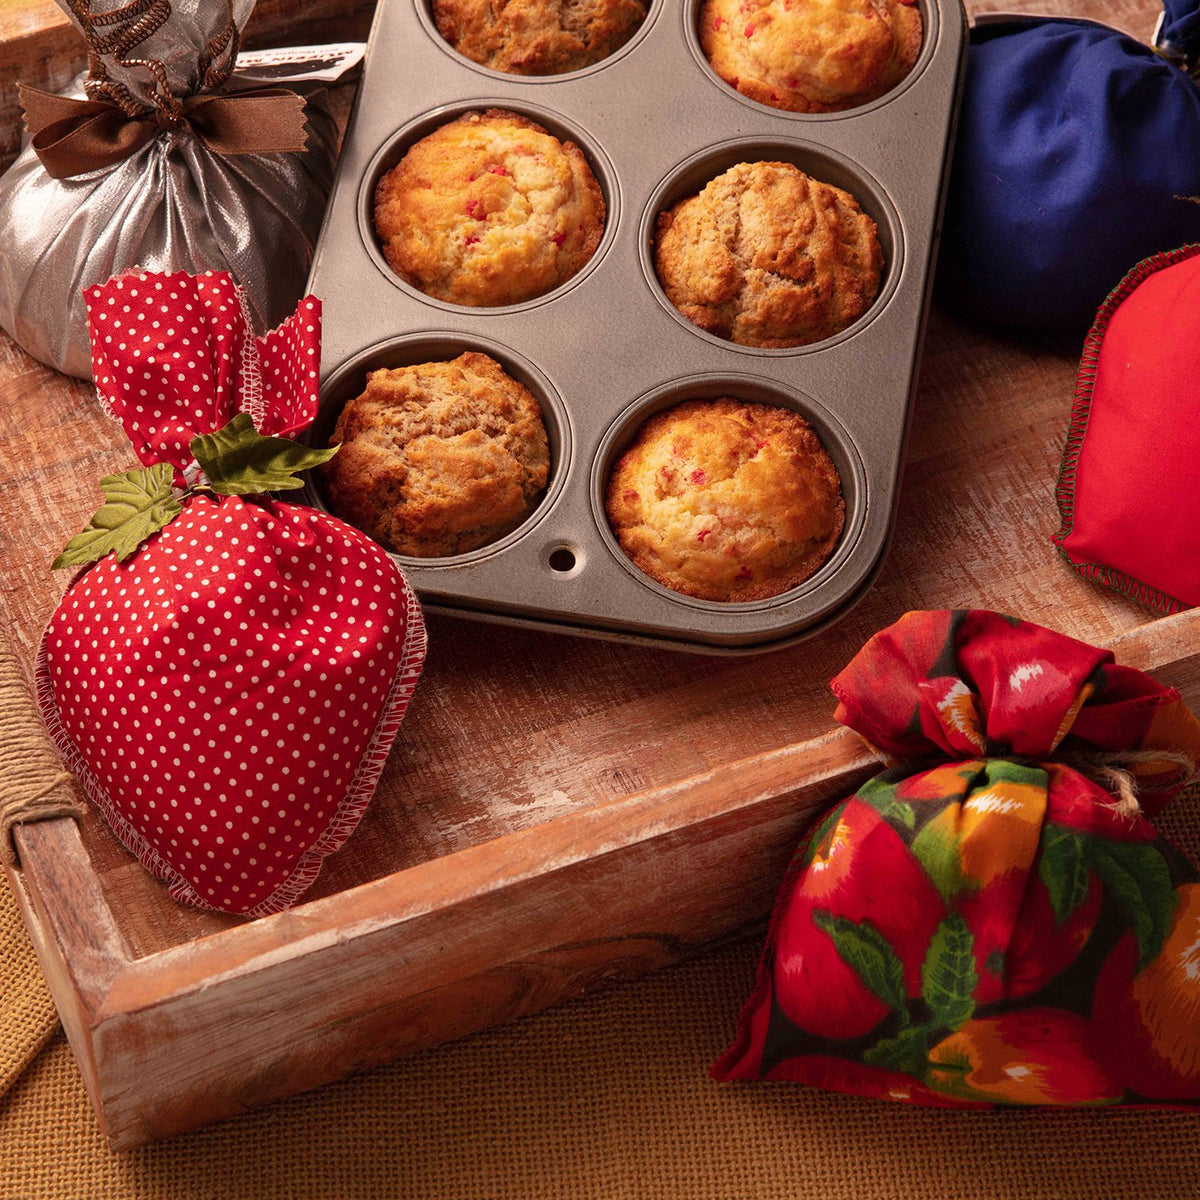 Baked strawberry muffins